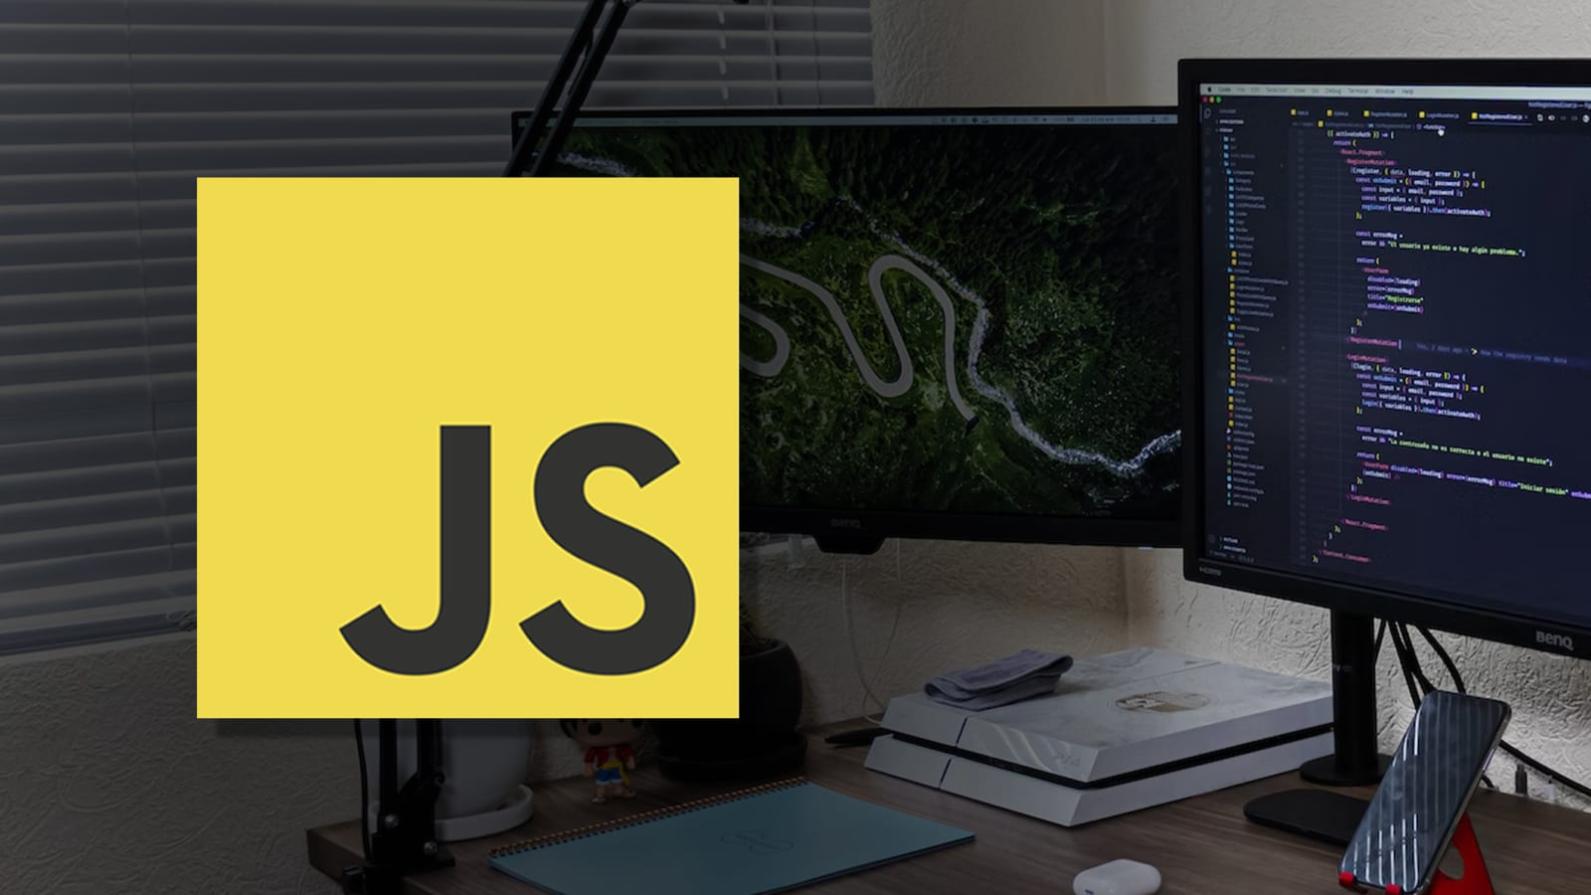 What Are the Best Practices for Debugging and Profiling JavaScript Code?